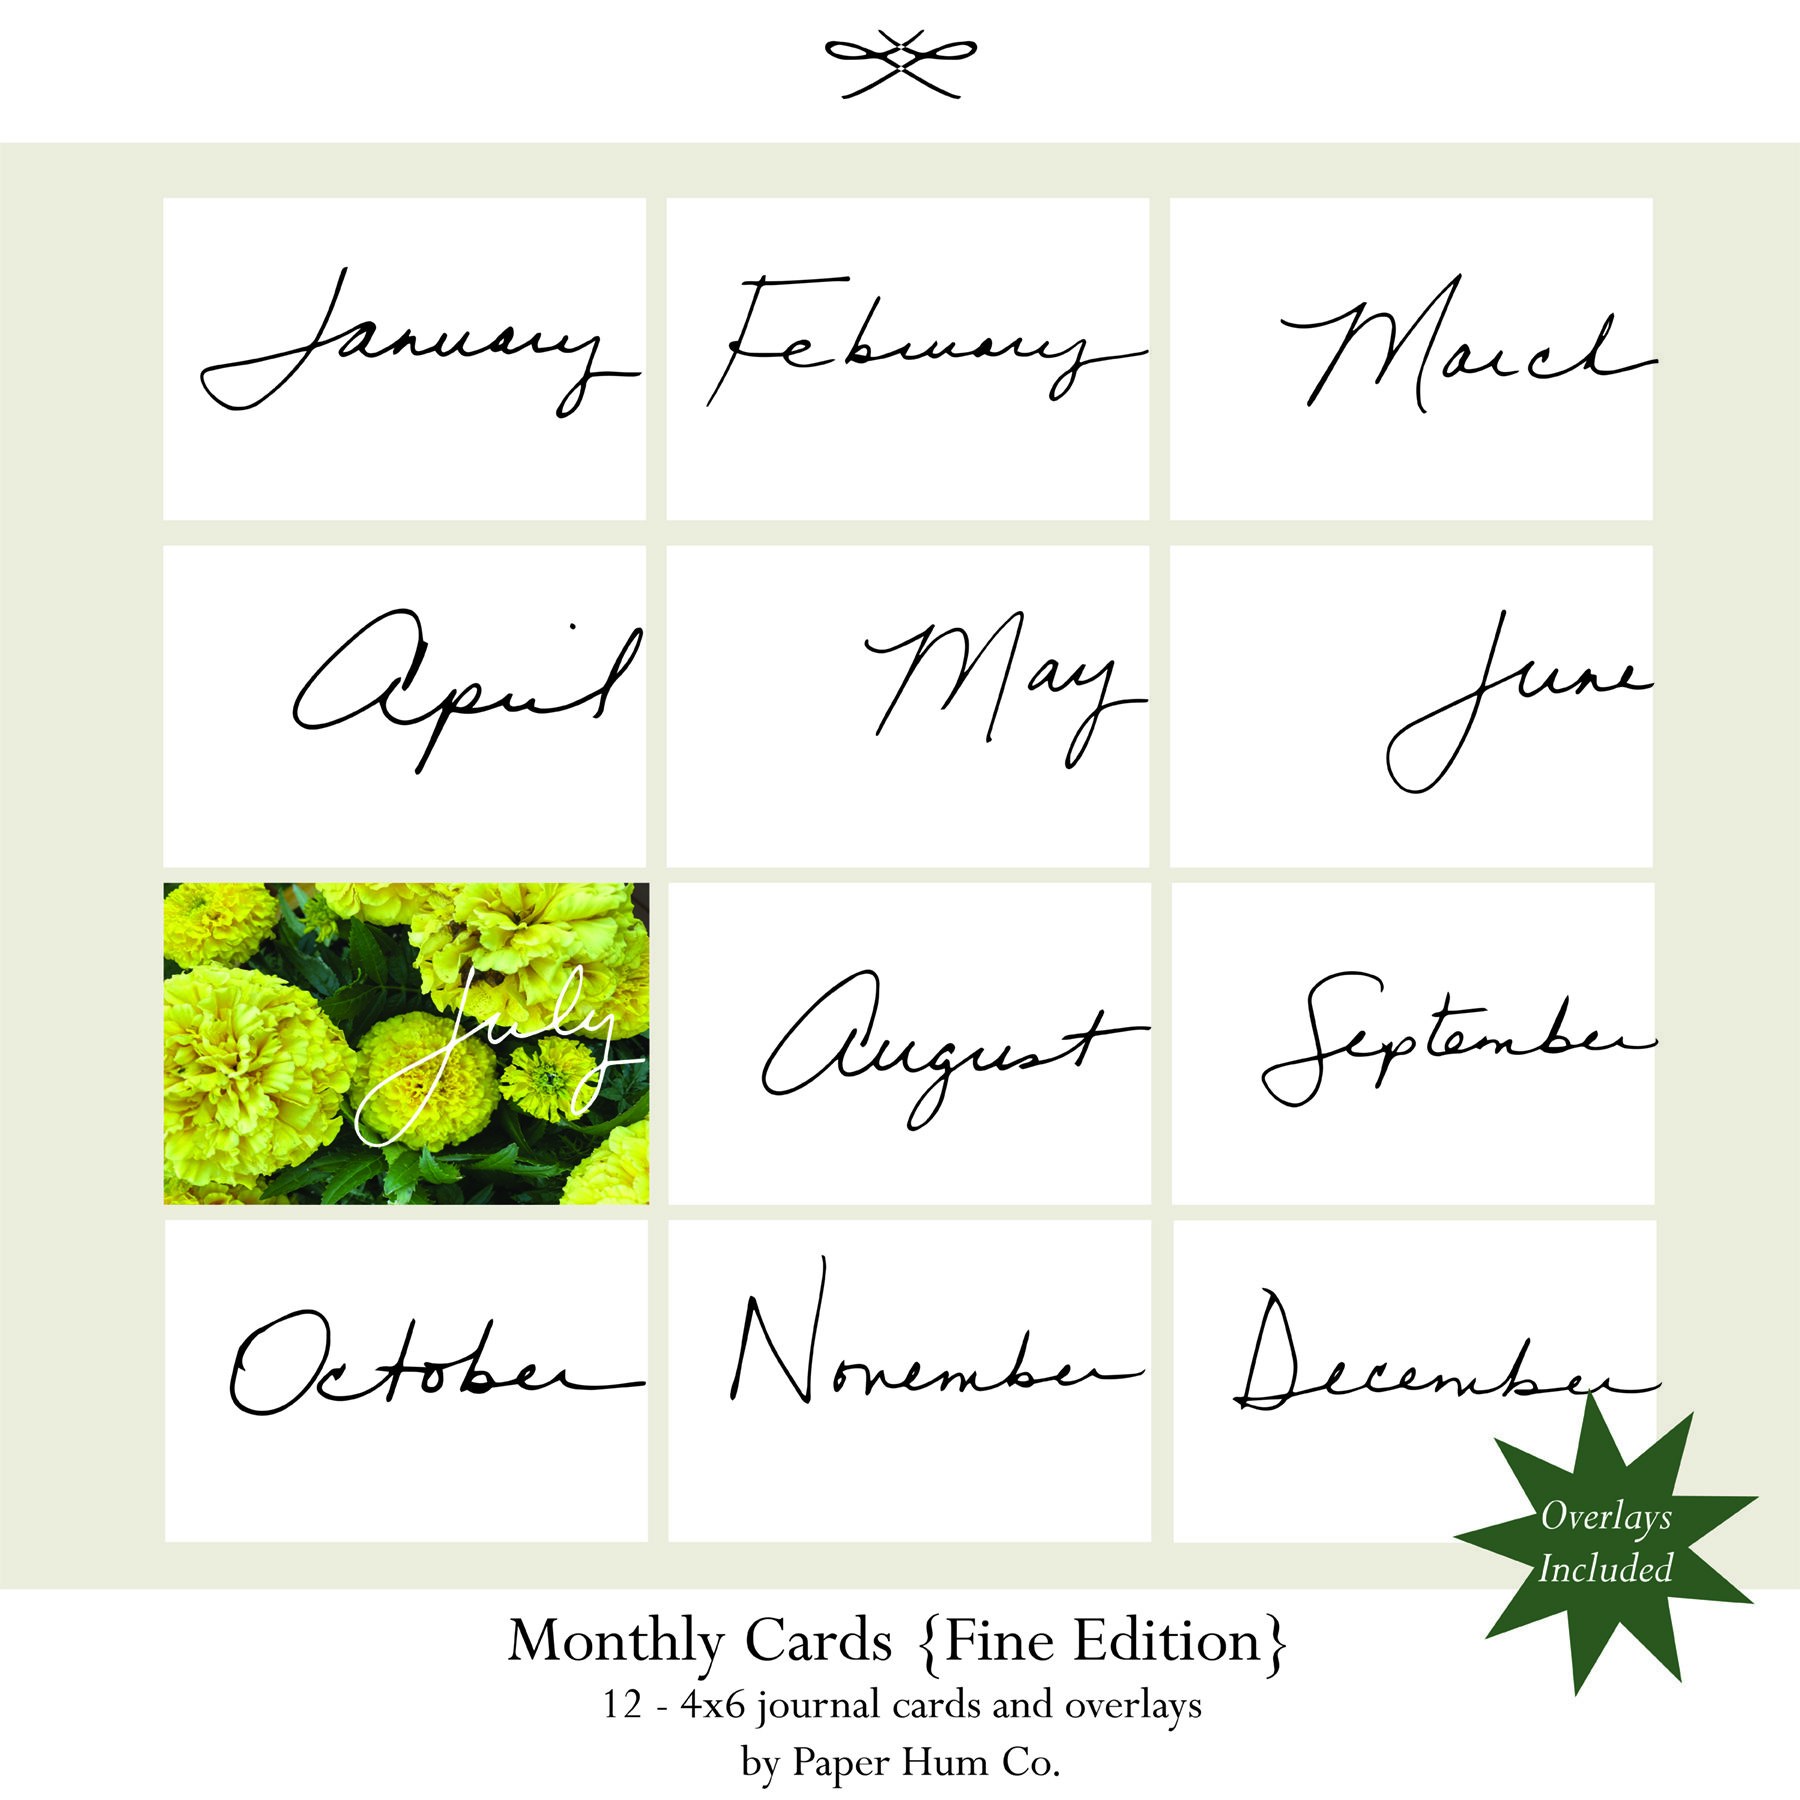 Paper Hum Co. - 4x6 Monthly Journal Cards (Fine Edition)